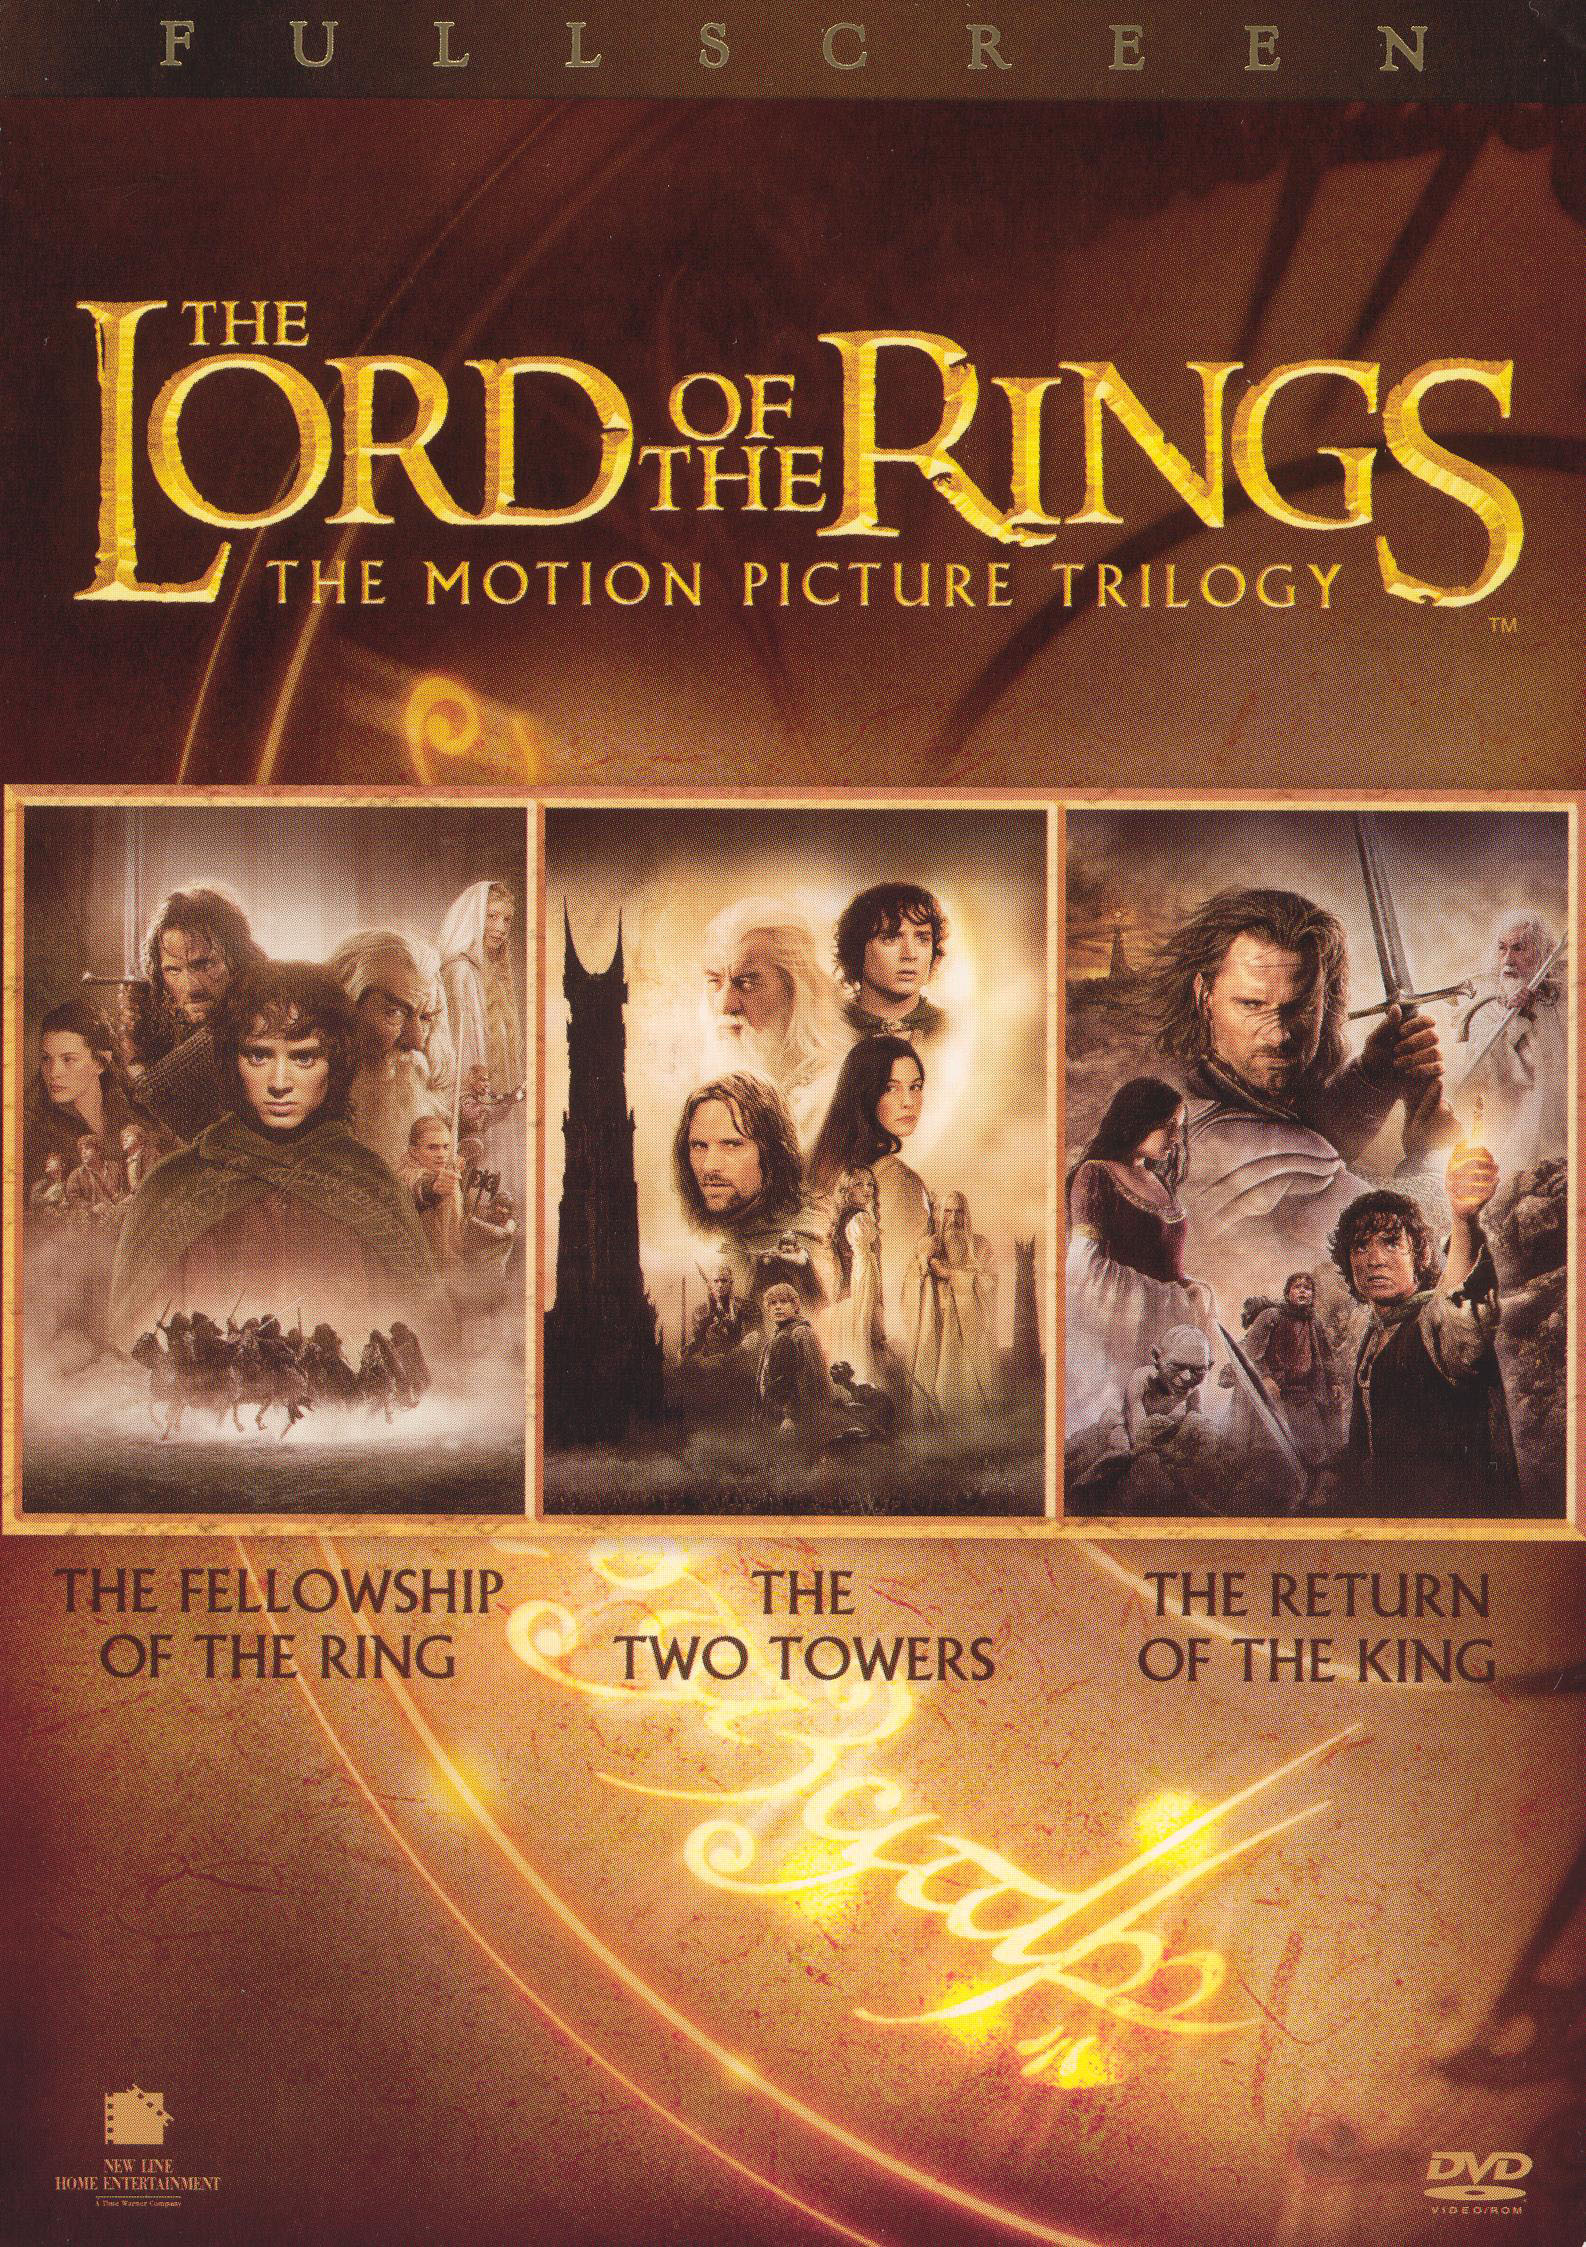 The Lord of the Rings: The Motion Picture Trilogy - Film su Google